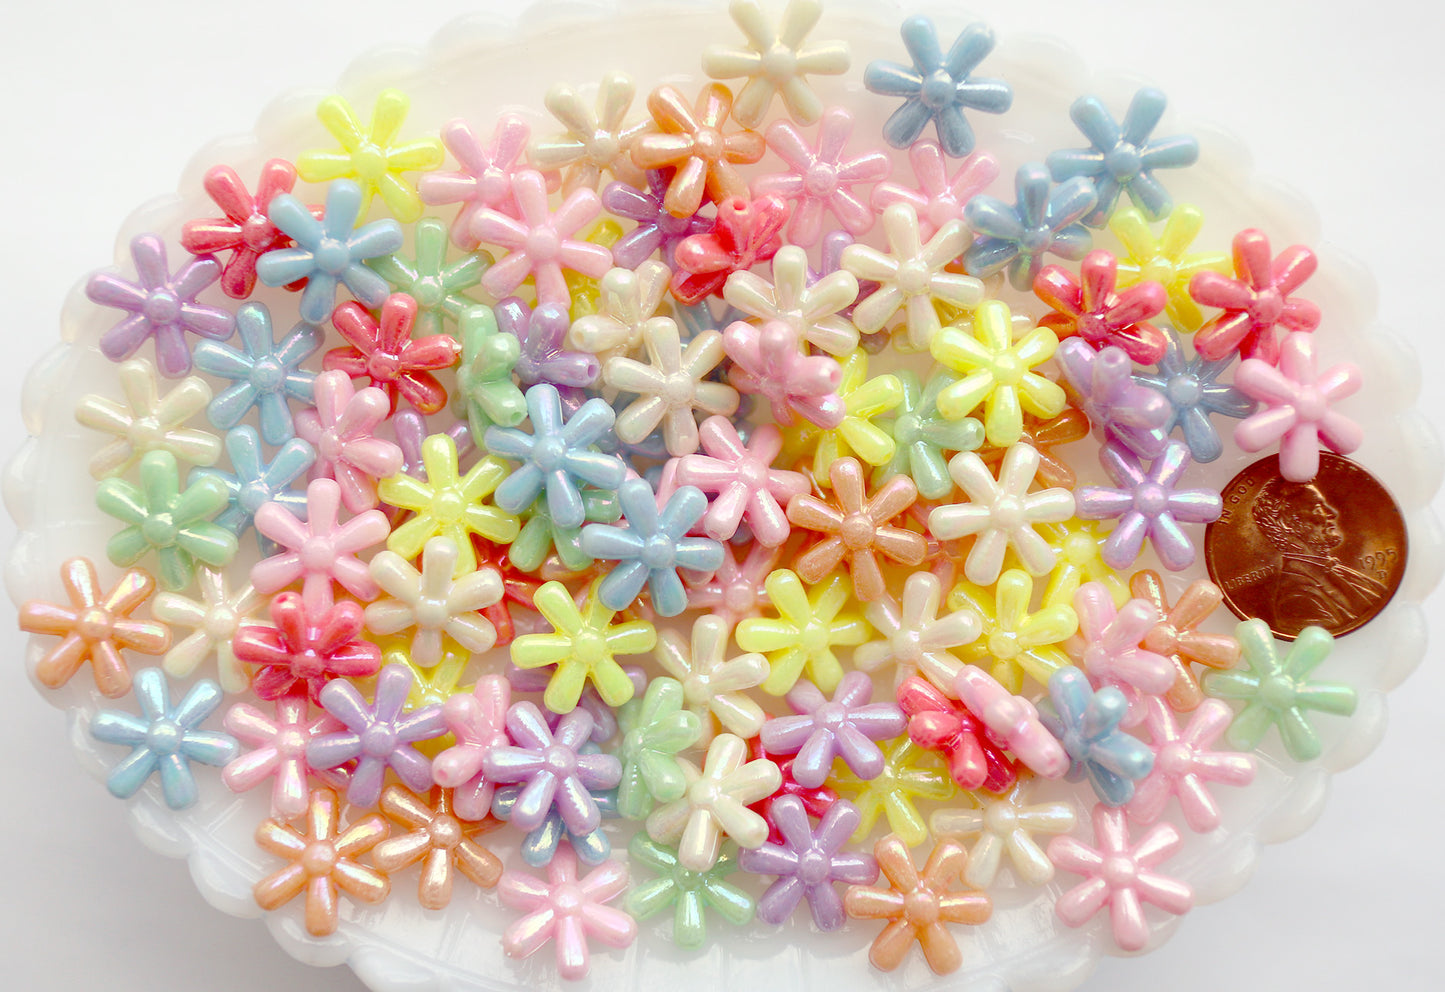 Flower Beads - 13mm AB Pastel 6-Petal Flower Beautiful Bright Iridescent Color Plastic Acrylic or Resin Beads – 100 pc set